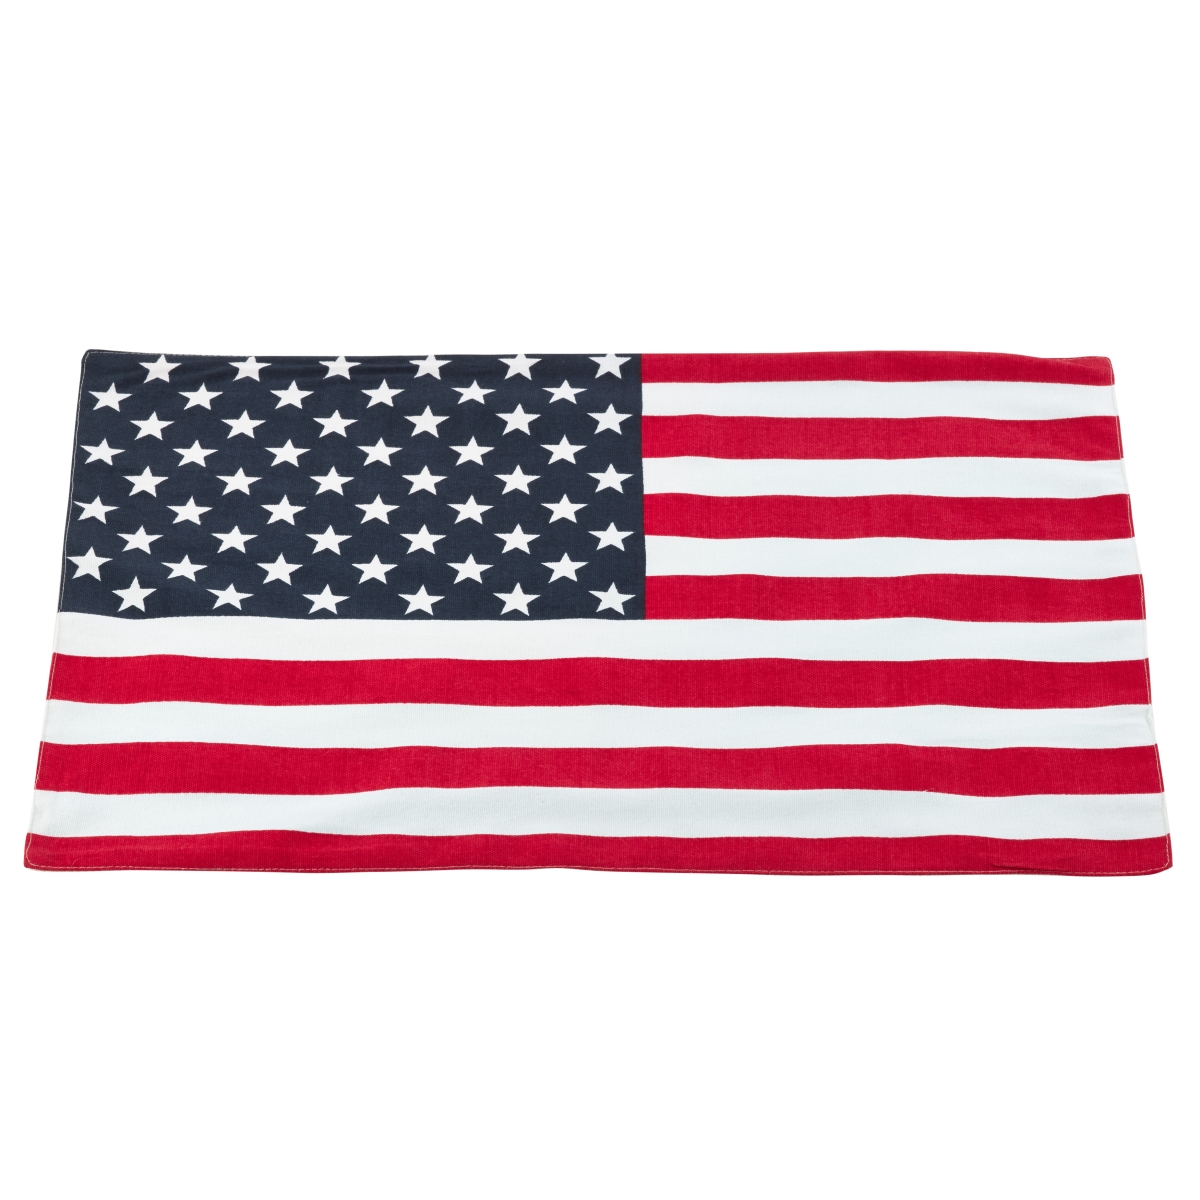 0704.m1420b 14 X 20 In. Star Spangled American Flag Design Placemats, Multi Color - Set Of 4